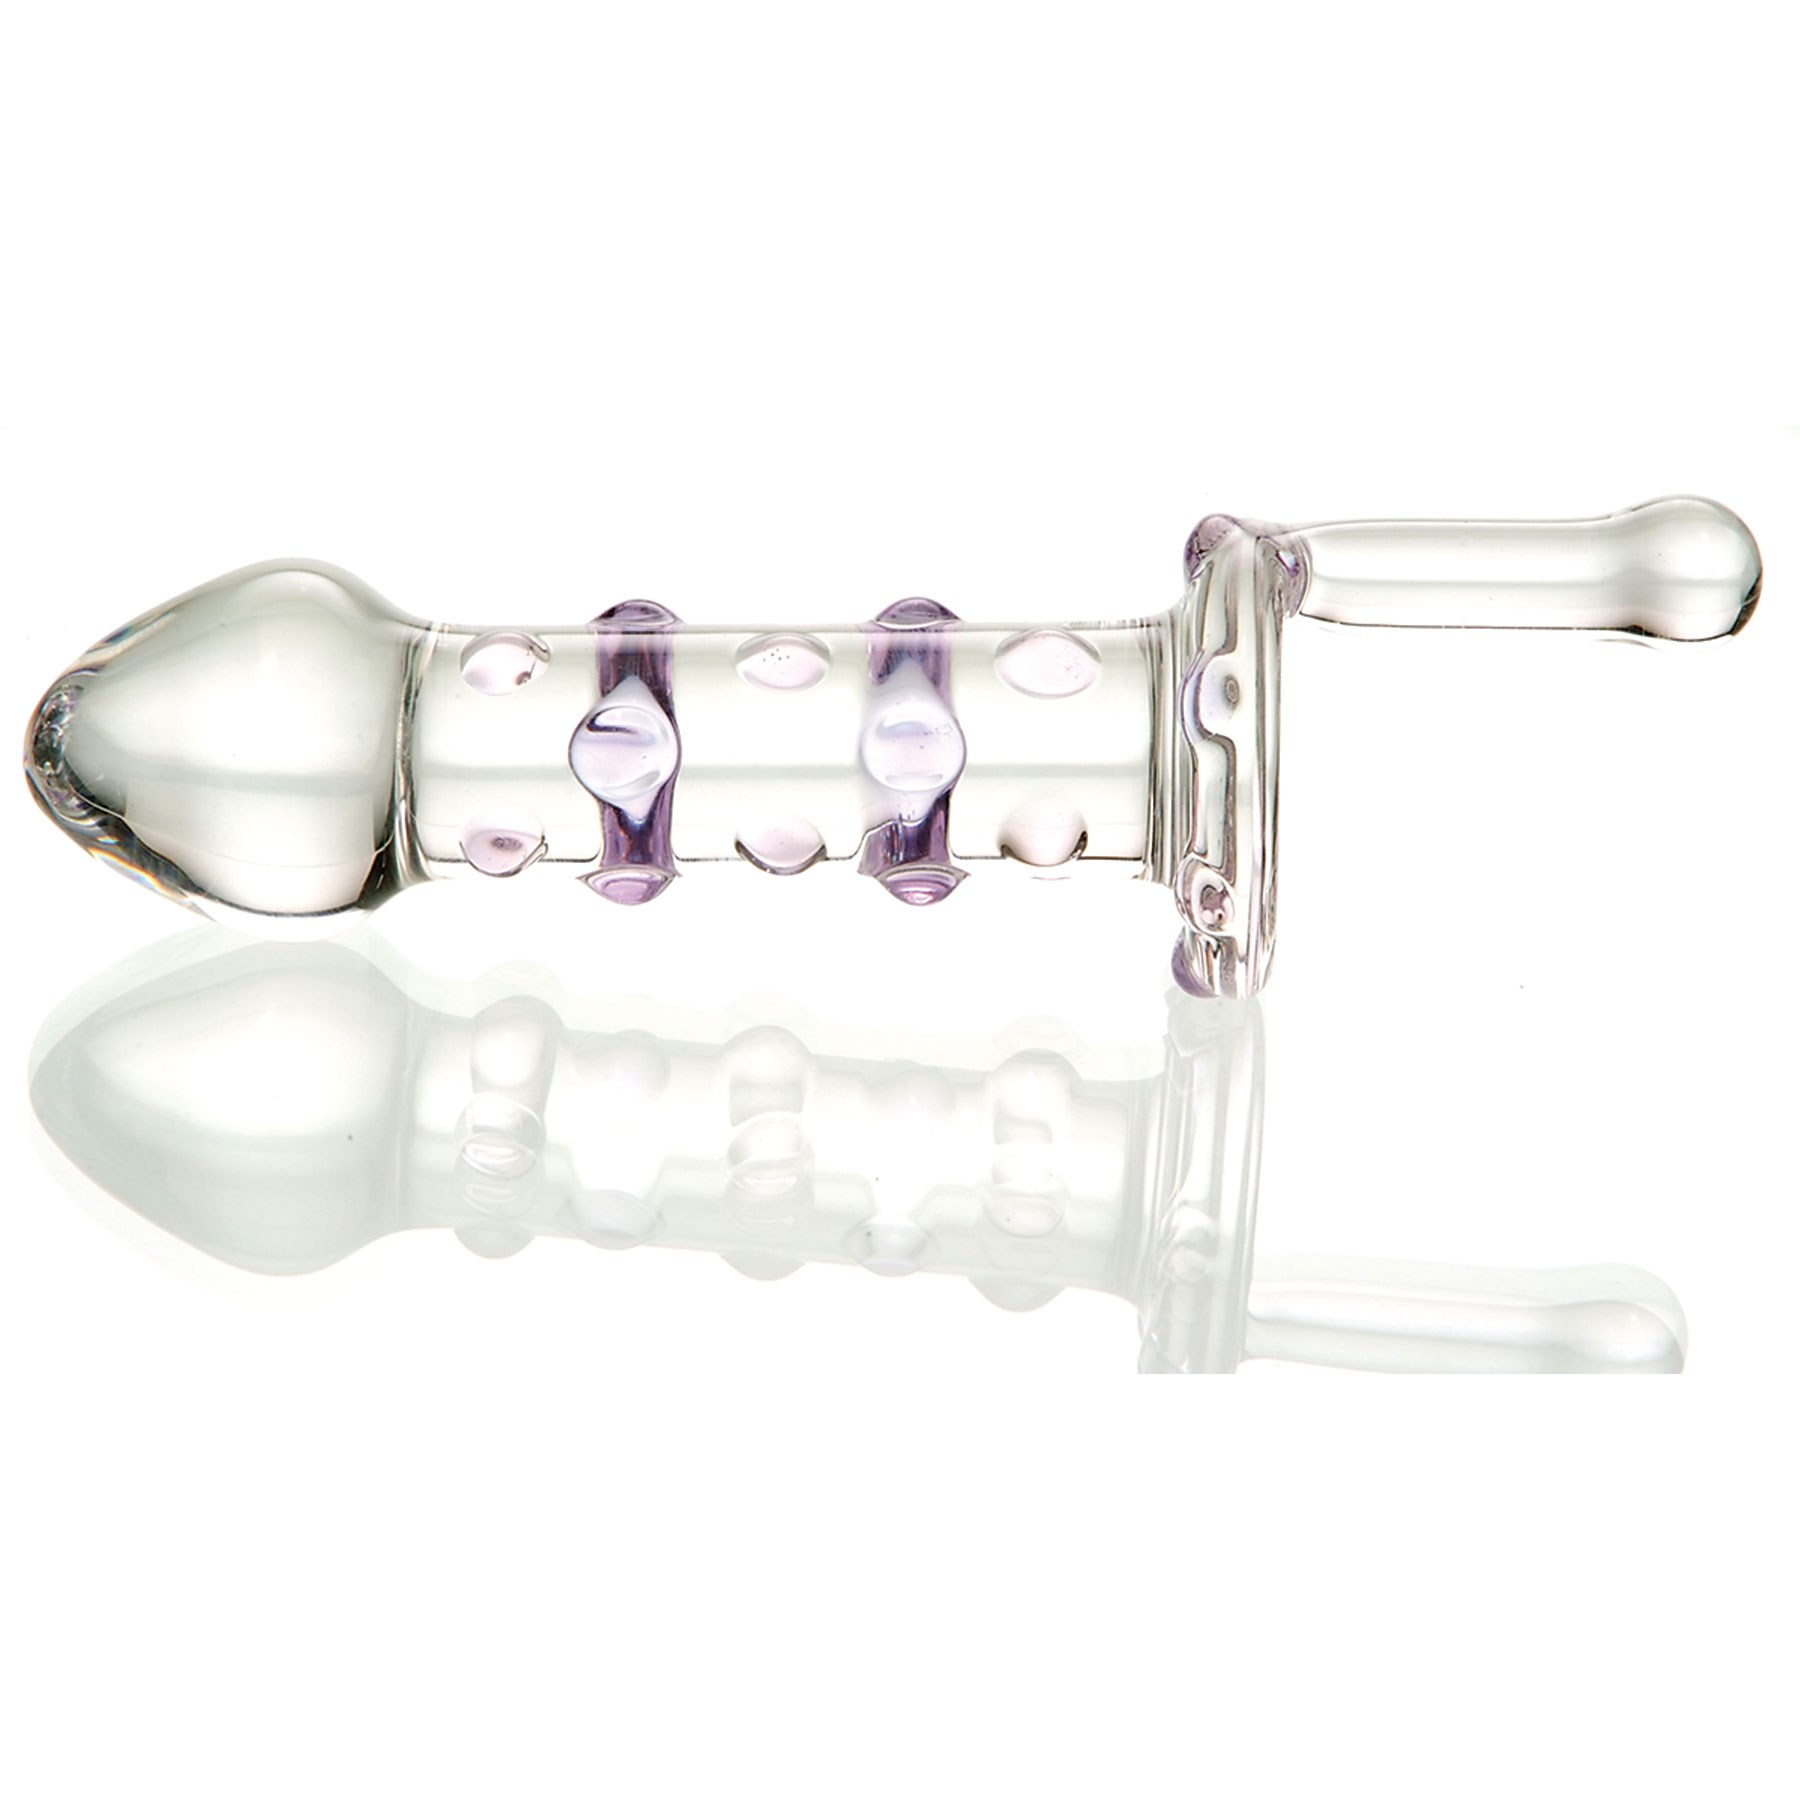 Glass Candy Land Juicer side view